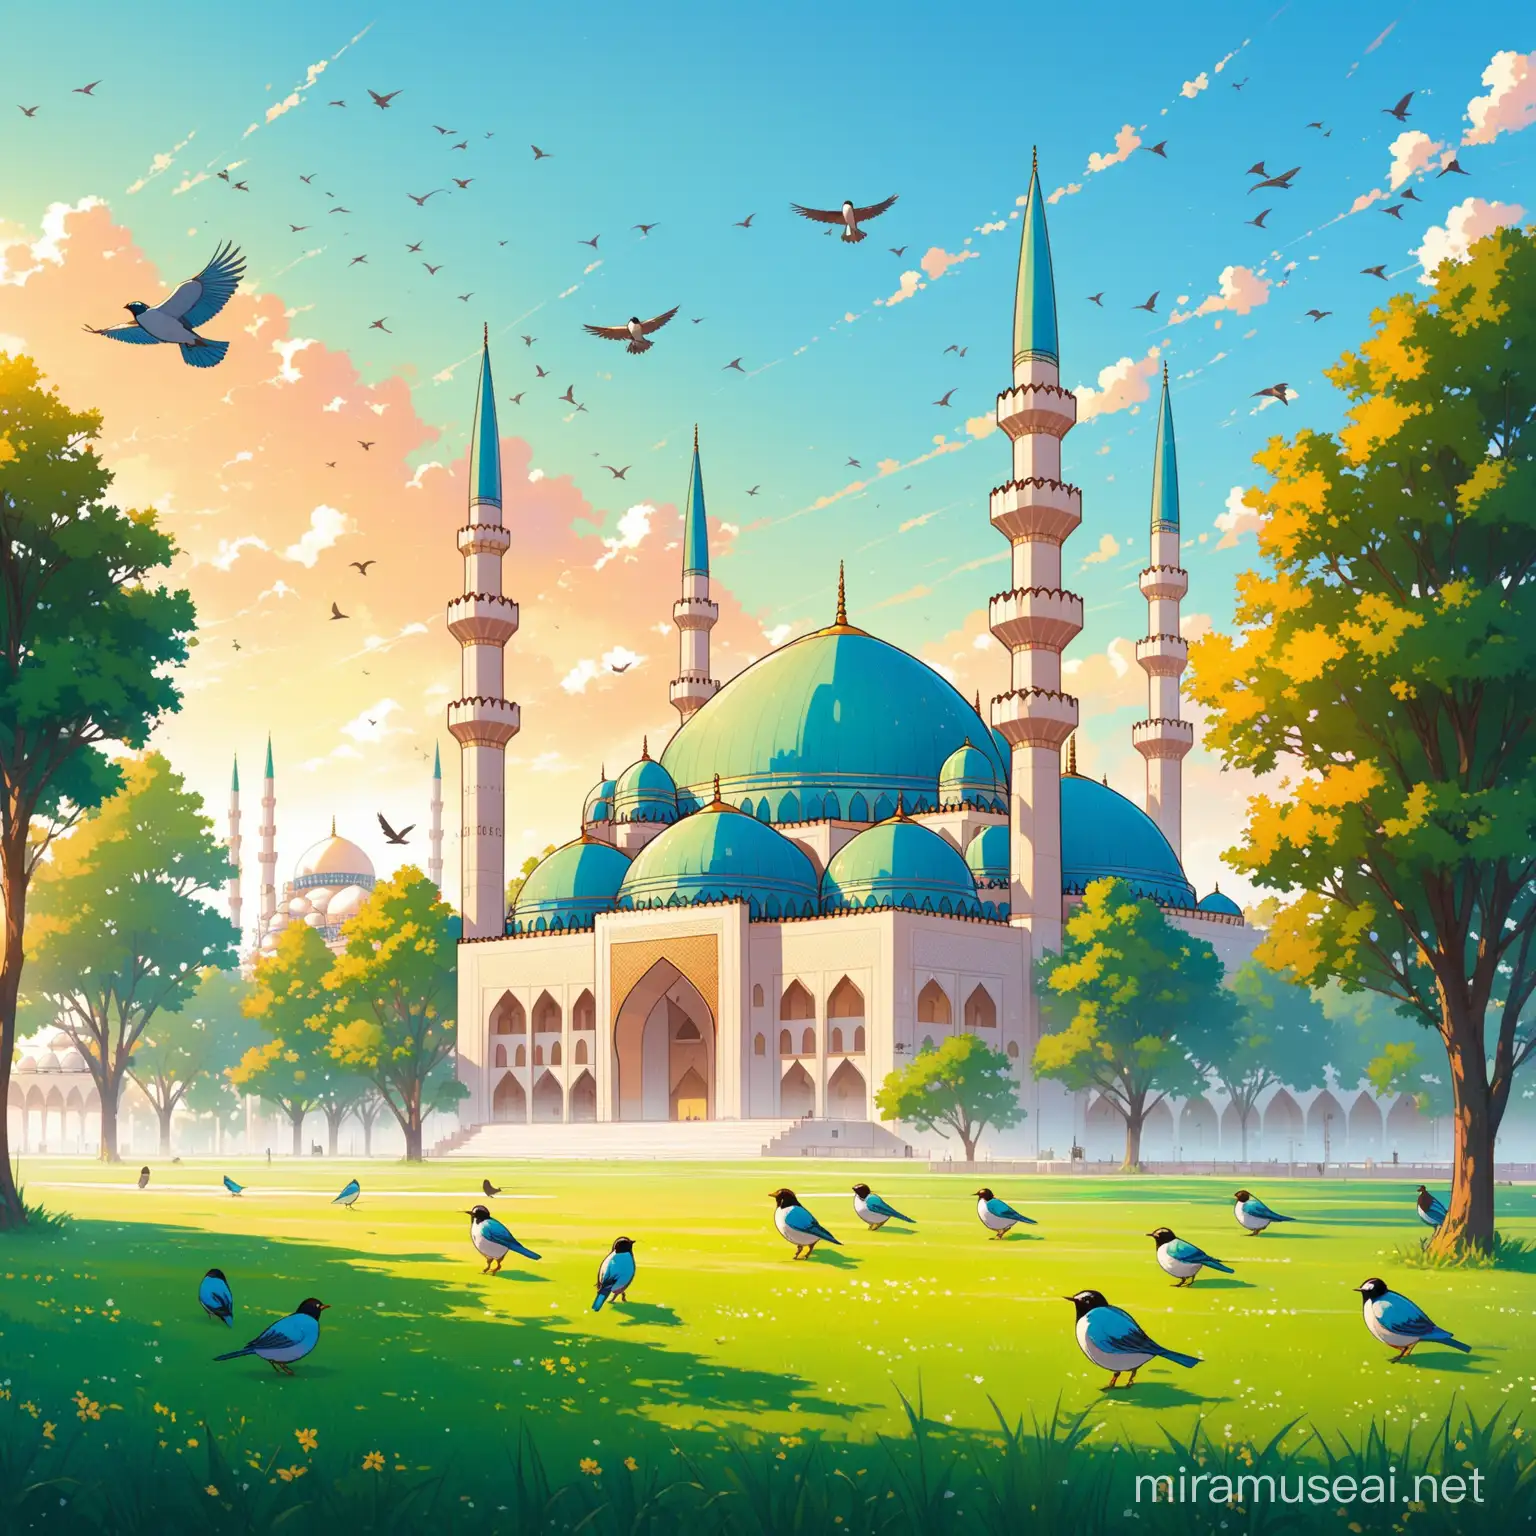 Grand Mosque Surrounded by Nature Peaceful Scene with Birds and Trees